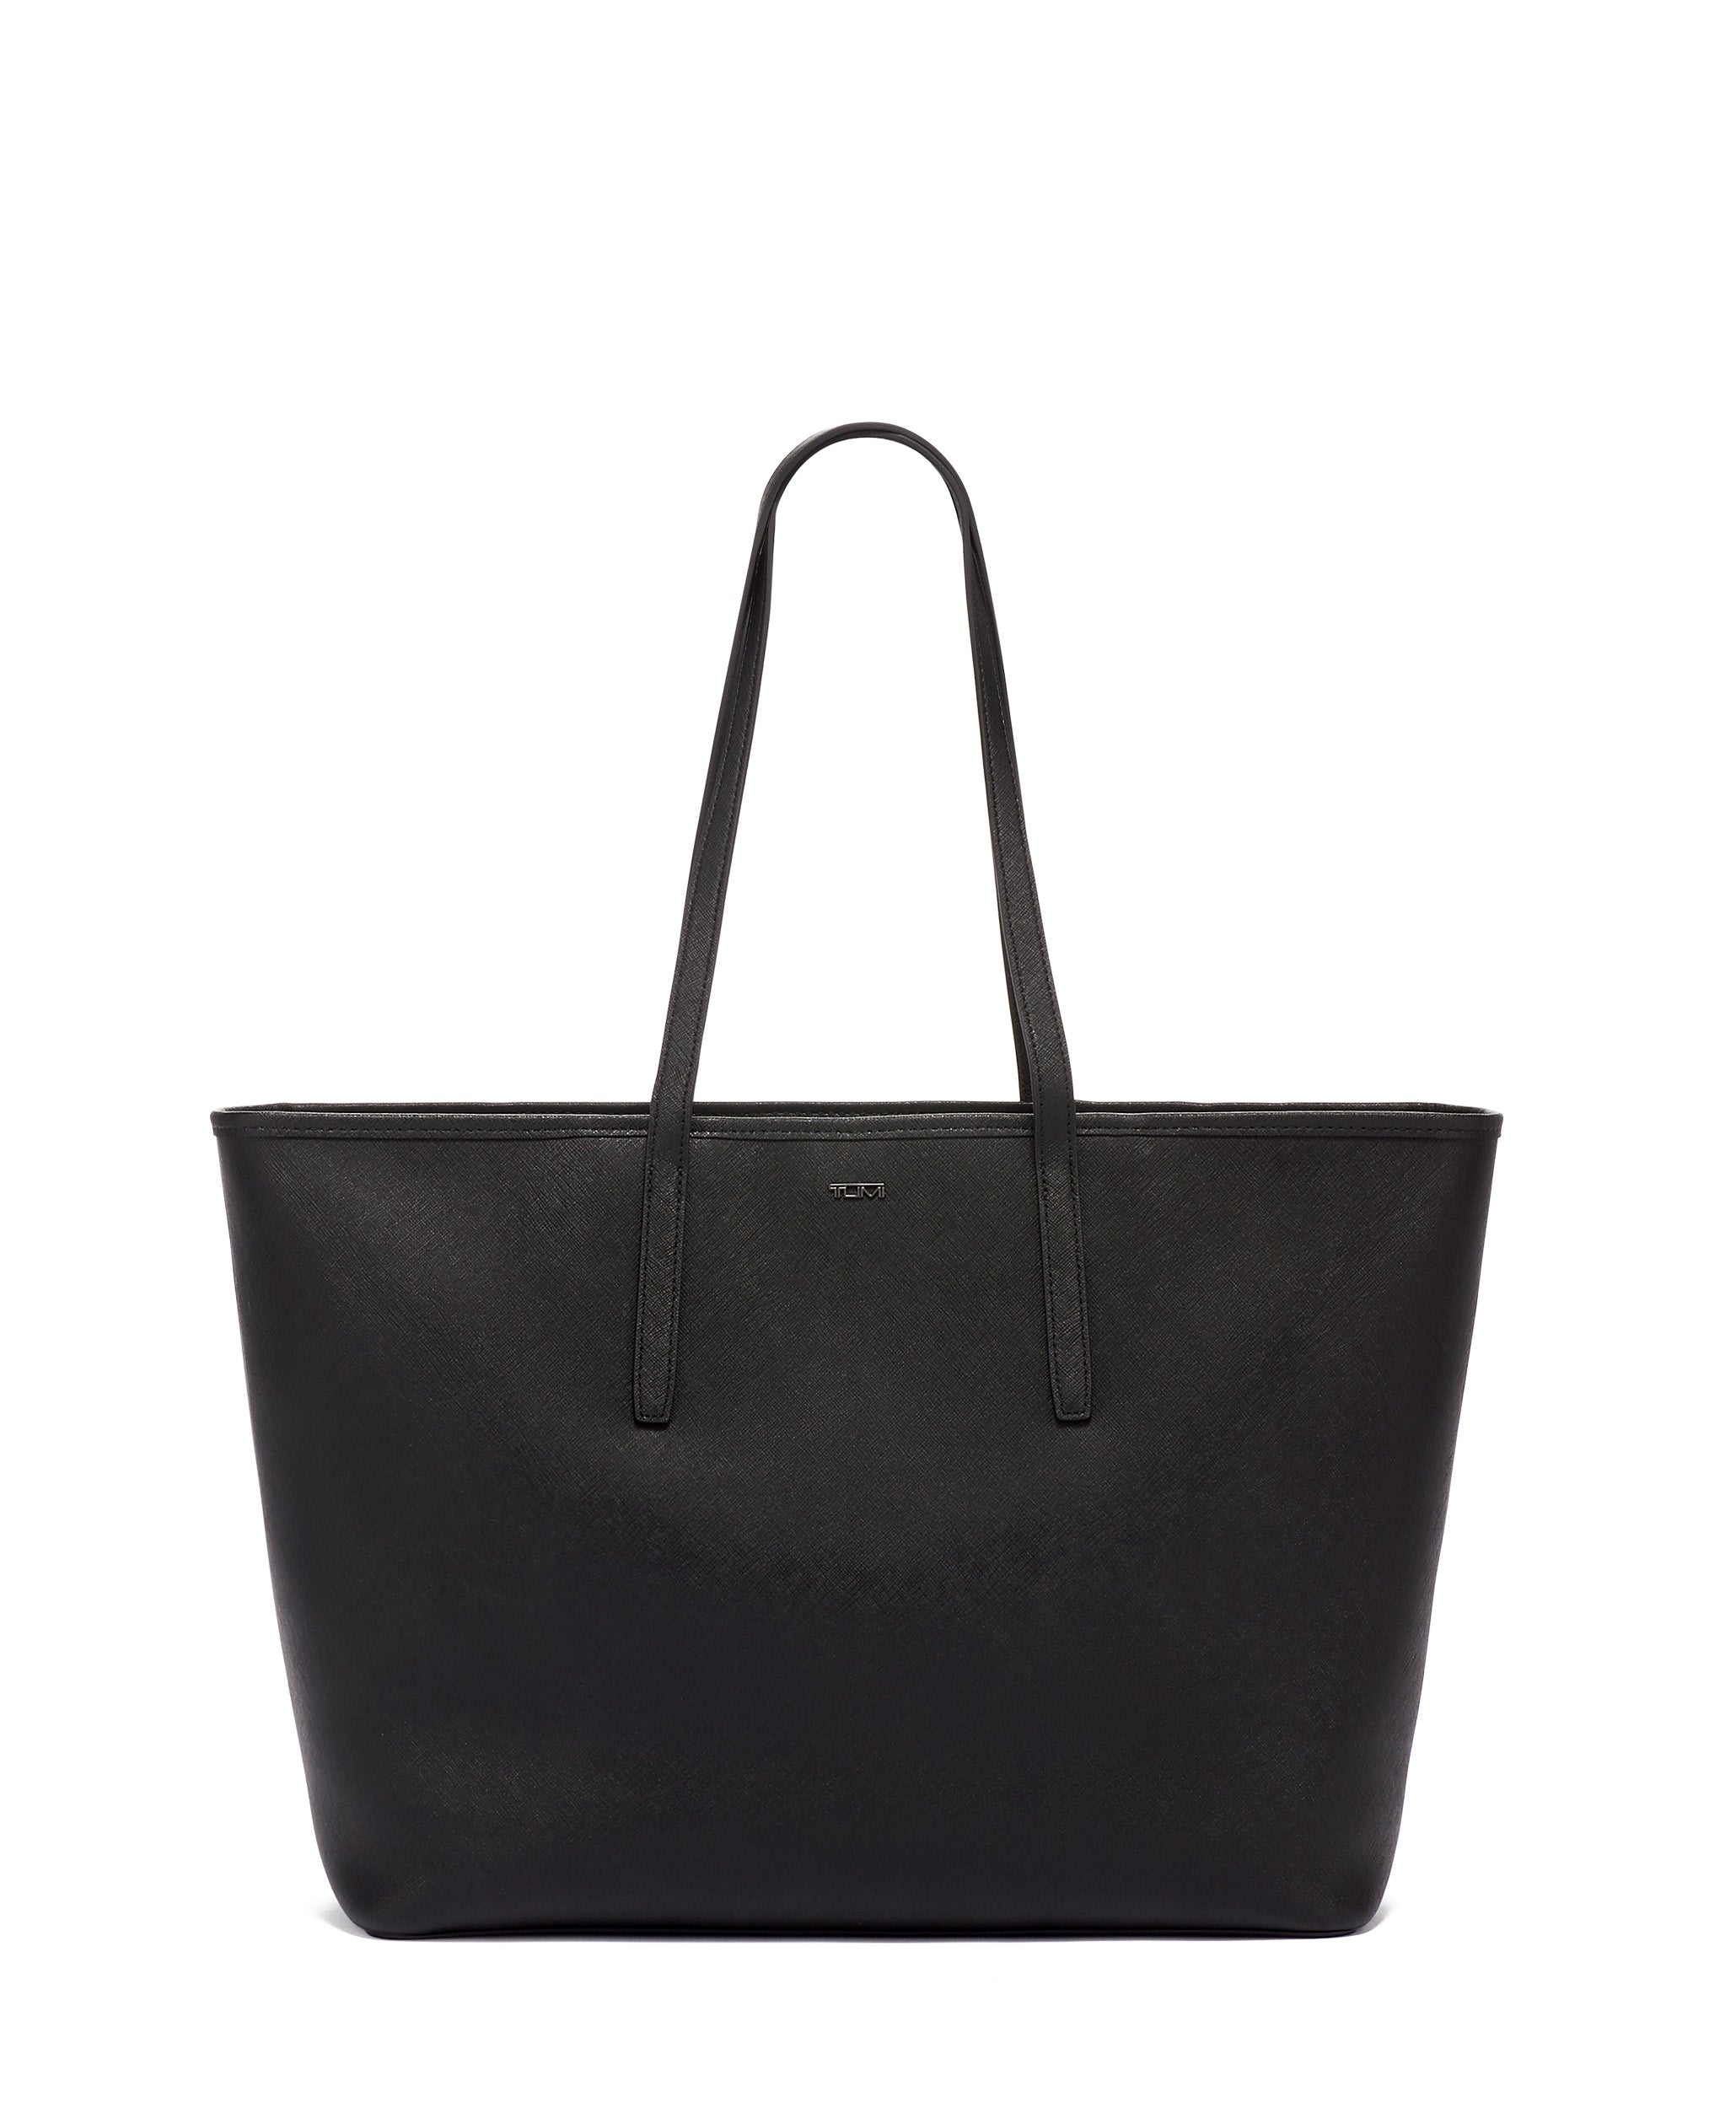 TUMI Totes Everyday Tote – Luggage Online